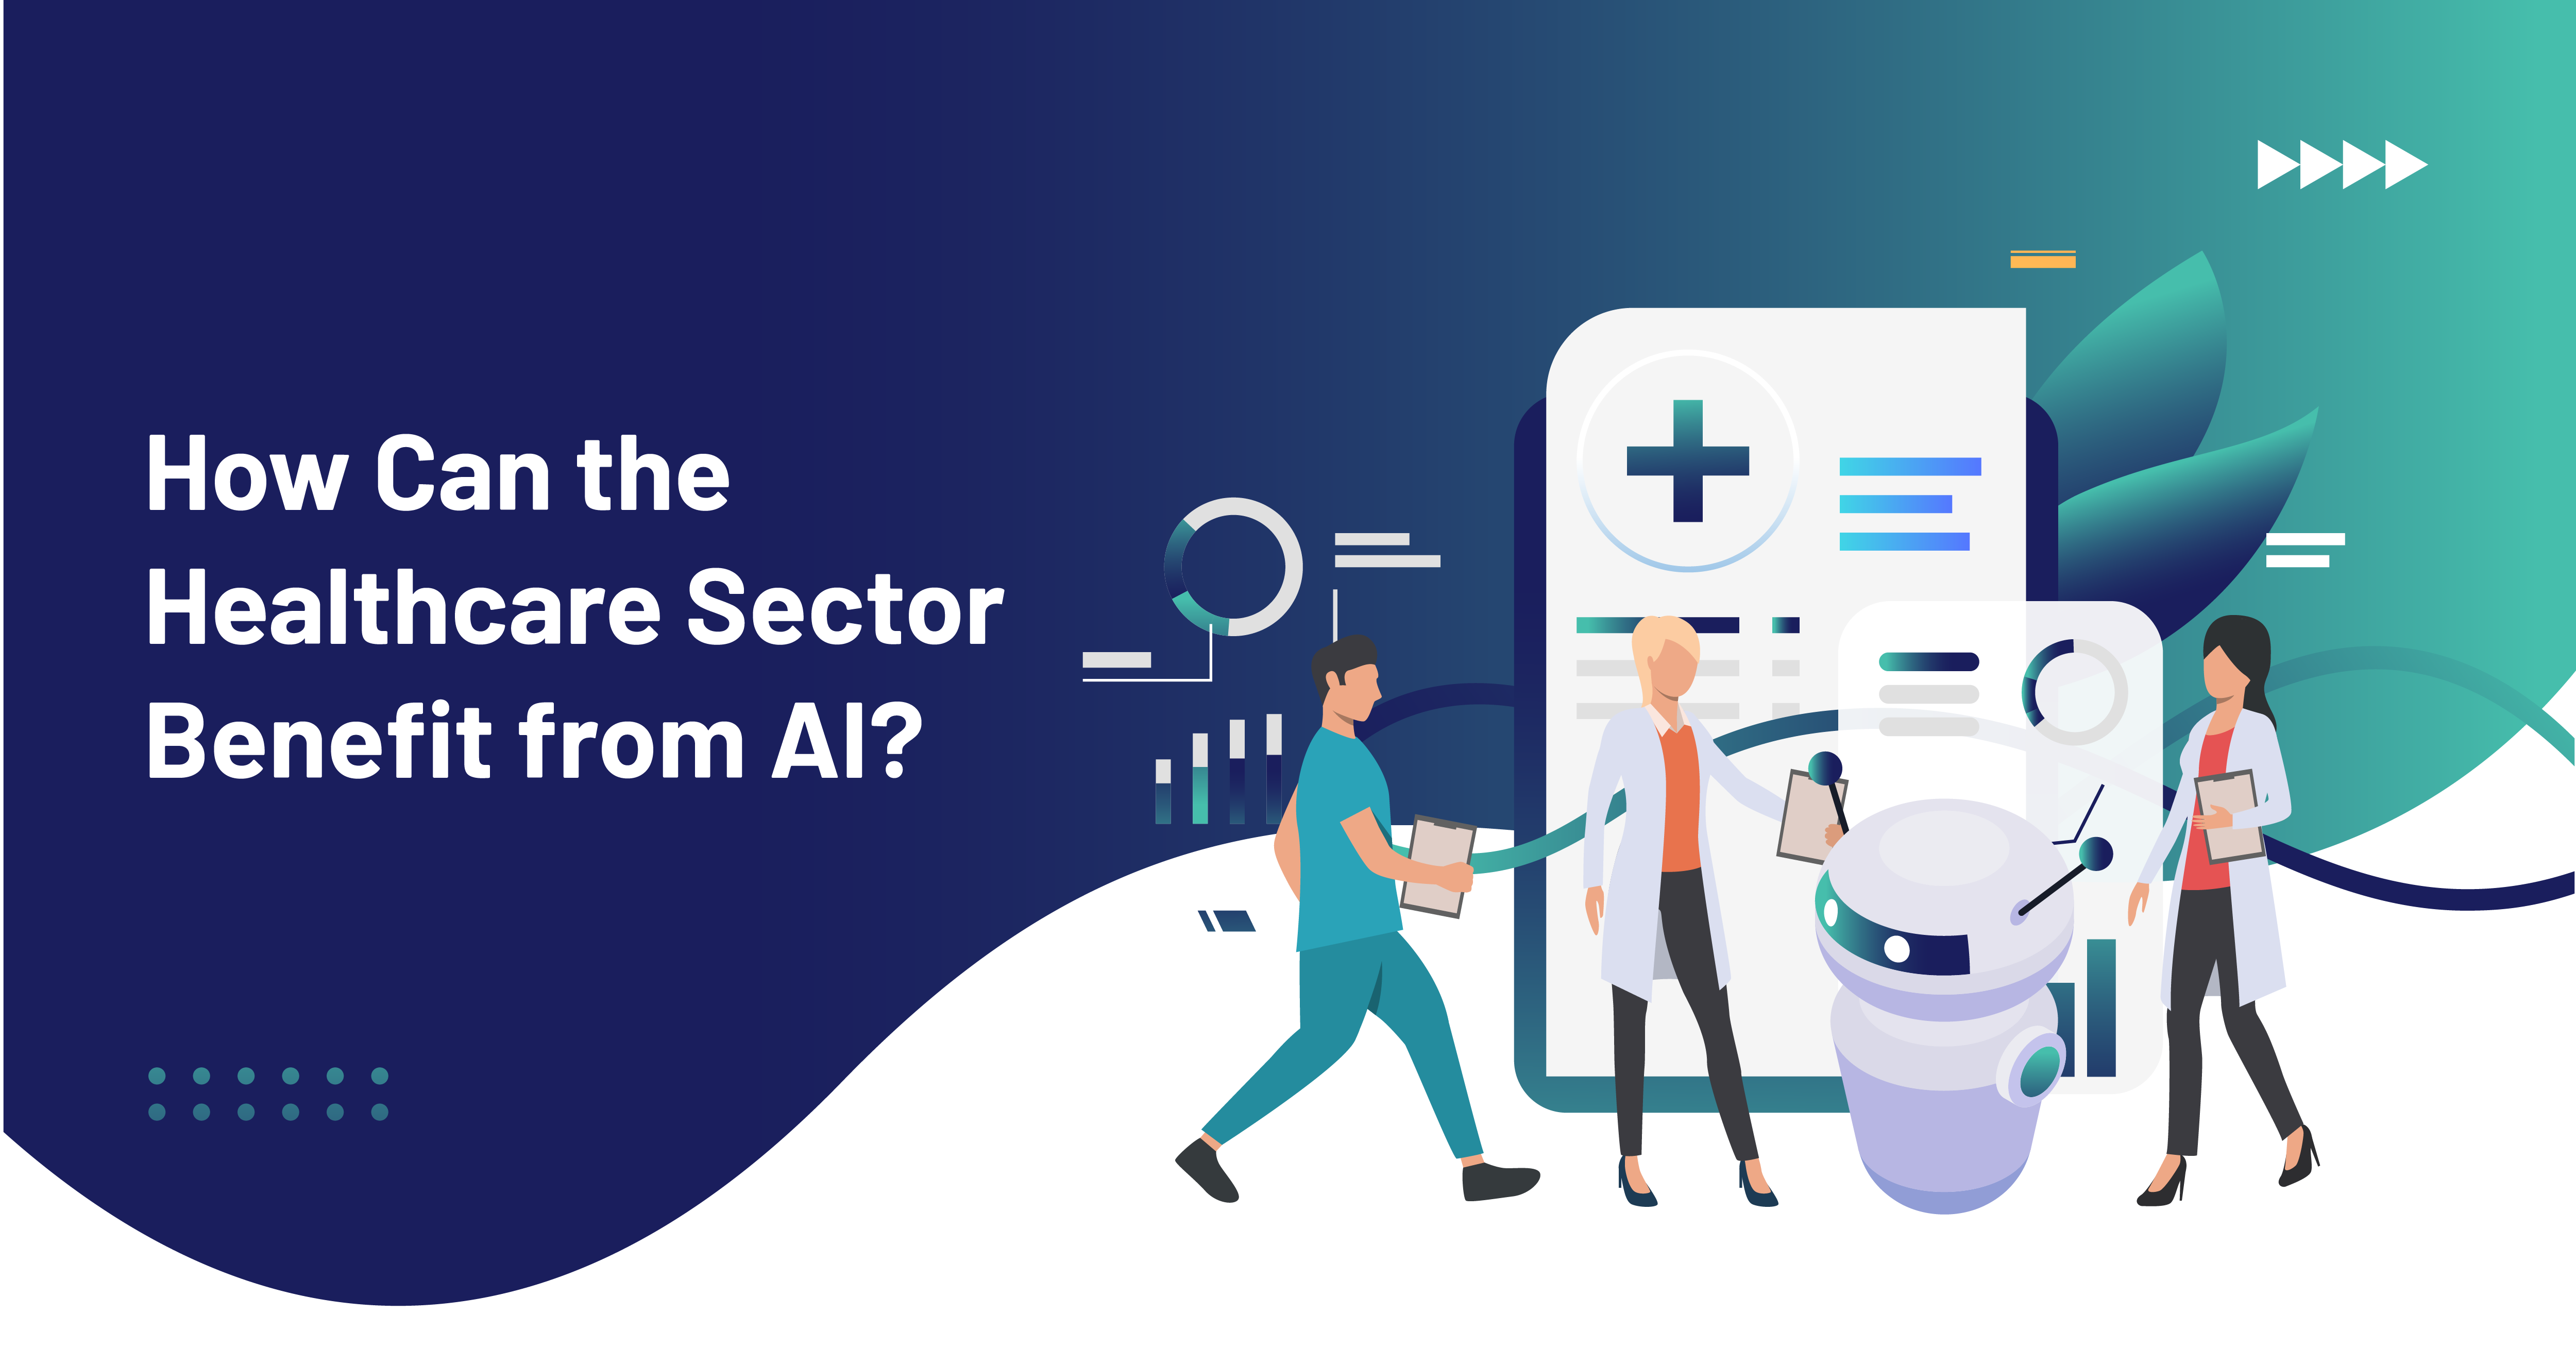 Understanding the Perks of AI in Healthcare Here are some prominent advantages of AI implementation in the healthcare domain:  Facilitates seamless operations and task automation   AI has brought numerous inventions in the way processes and jobs are carried out in the healthcare industry. Booking appointments, follow-up doctor visits, surgeries, tracking medical records, correcting patient information from various units, and checking and fixing incorrect insurance claims can all get streamlined and effortless with AI.  Aid in medical research Comprehensive medical research requires millions and billions of dollars, not to discuss the effort and time required to spend on research for more satisfactory ailment deterrence or the finding new medications. Apart from that, AI can further assist in amassing data from different sources. Delivering real-time data makes it possible to transfer it across numerous networks and helps in medical findings that can be life-changing. The Bottom Line  Healthcare is a crucial domain where billions of lives depend on the precision and availability of information. As a result, AI holds the enormous possibility to transform the way the industry operates and streamline the lives of healthcare providers and patients, guaranteeing cost-efficiency in terms of money, time, effort, and resources. In addition, highly advanced artificially intelligent solutions have made complicated tasks such as diagnosing medical conditions, surgeries, examing patients under any events, etc., more convenient with exceptional results. So it might not be wrong to say that AI implementation will unquestionably fill gaps in medical accessibility and assure efficient healthcare availability to make a positive change. 